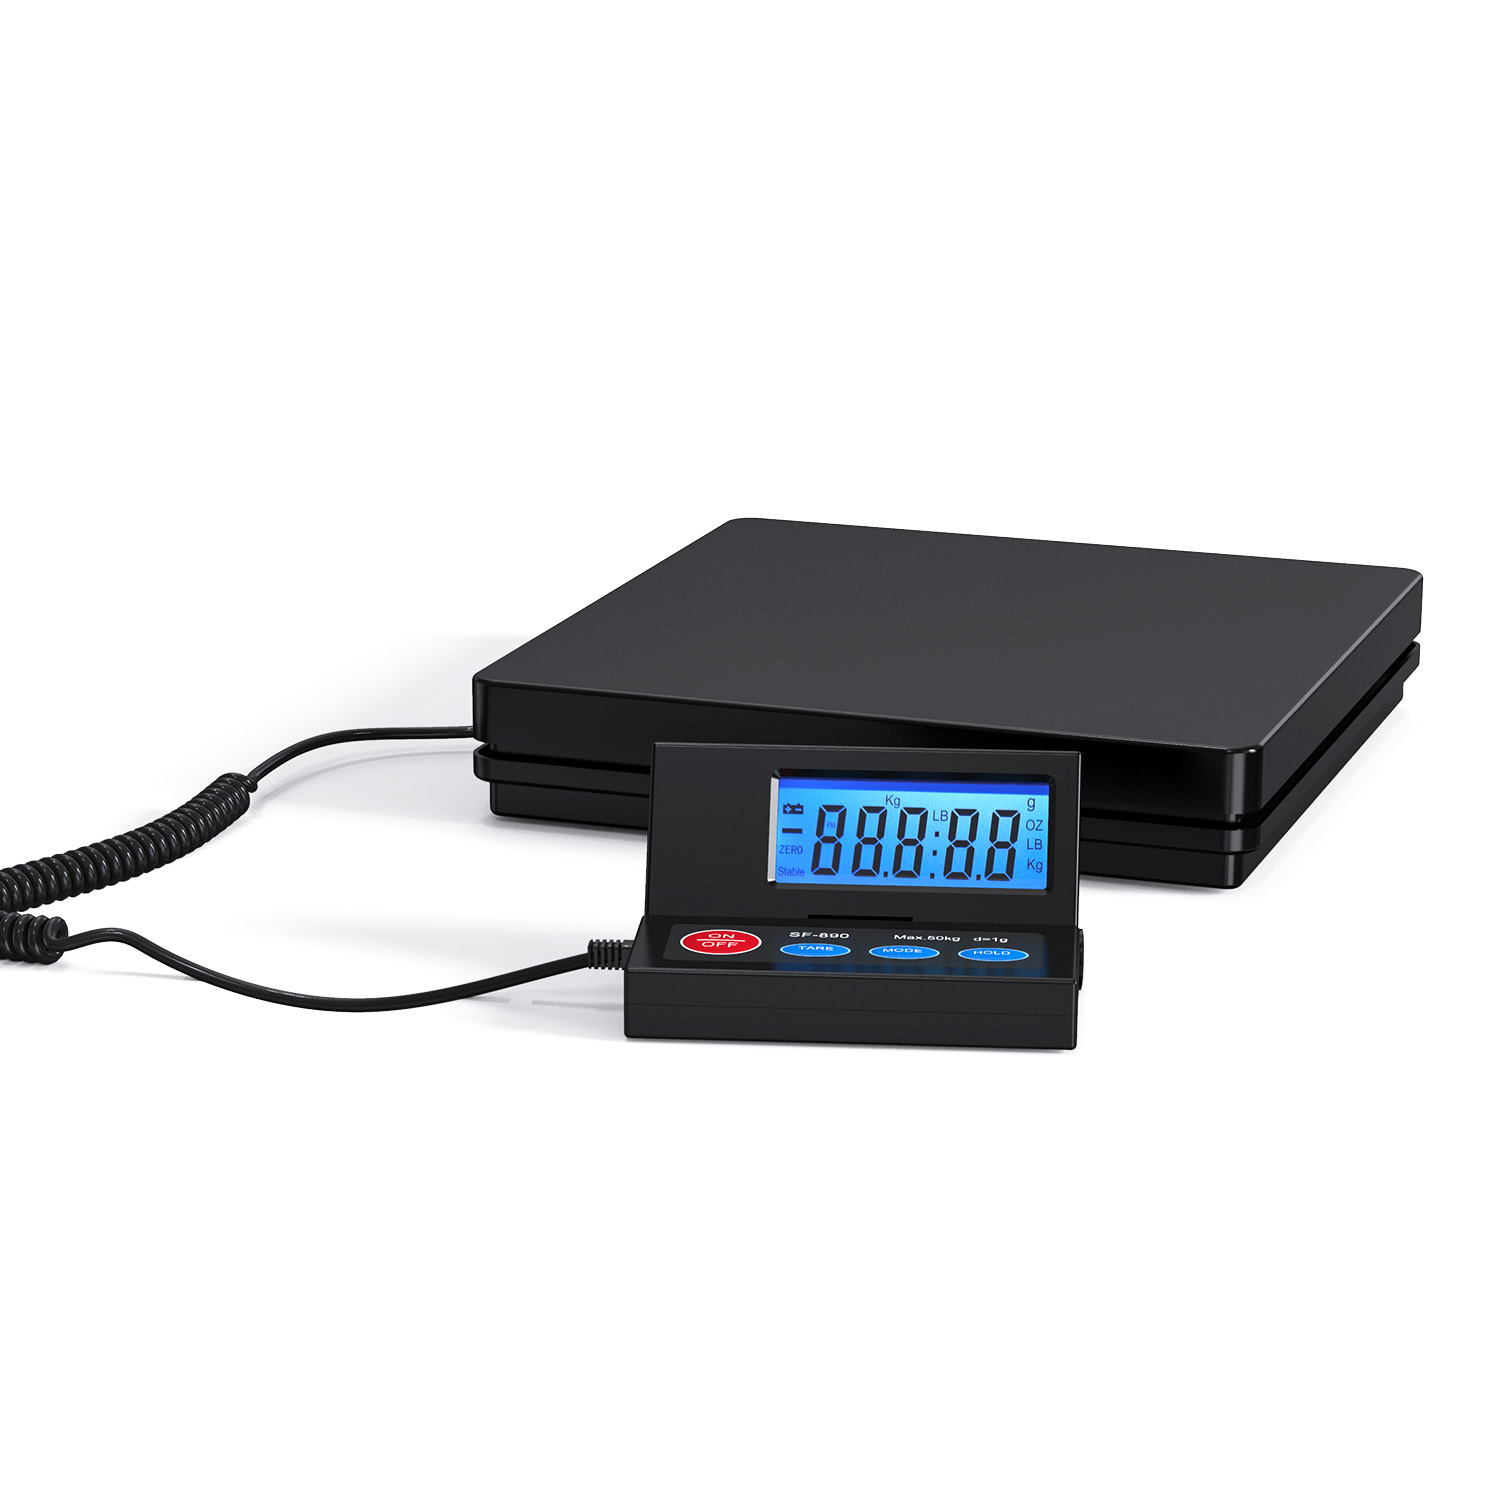 Suofei SF-890 Cheapest Large LCD ABS Material Electronic Digital Postal Shipping Weight Postal Scale